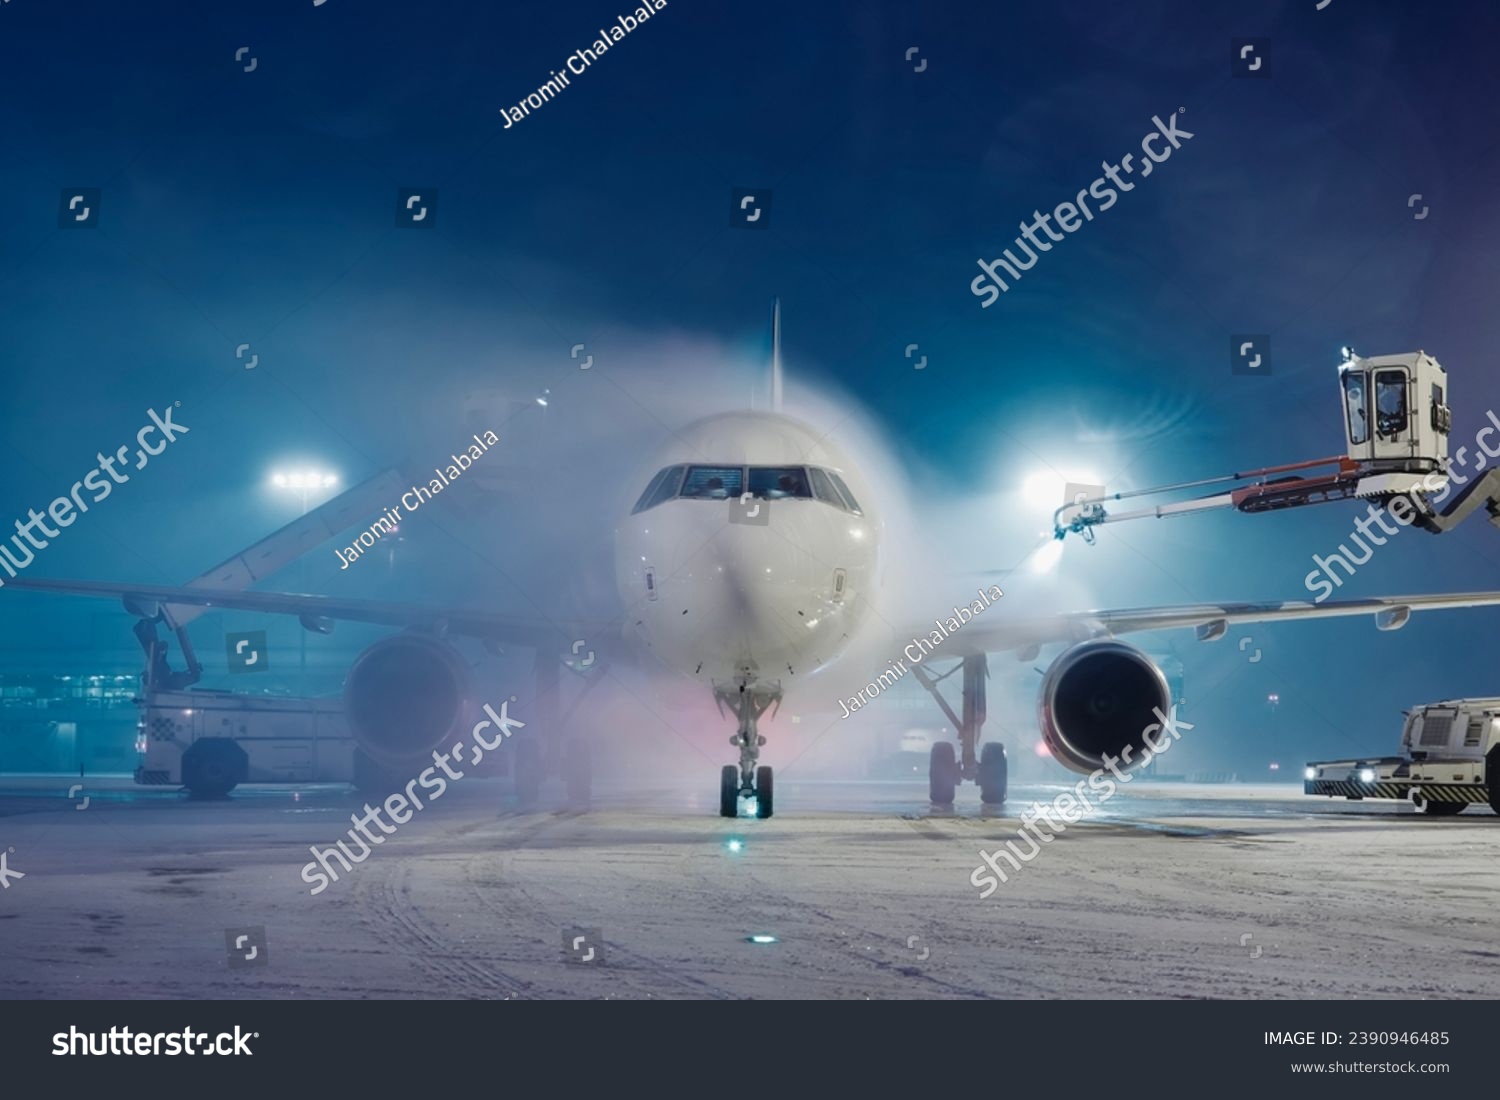 Deicing of airplane before flight. Winter frosty night and ground service at airport during snowfall.
 #2390946485